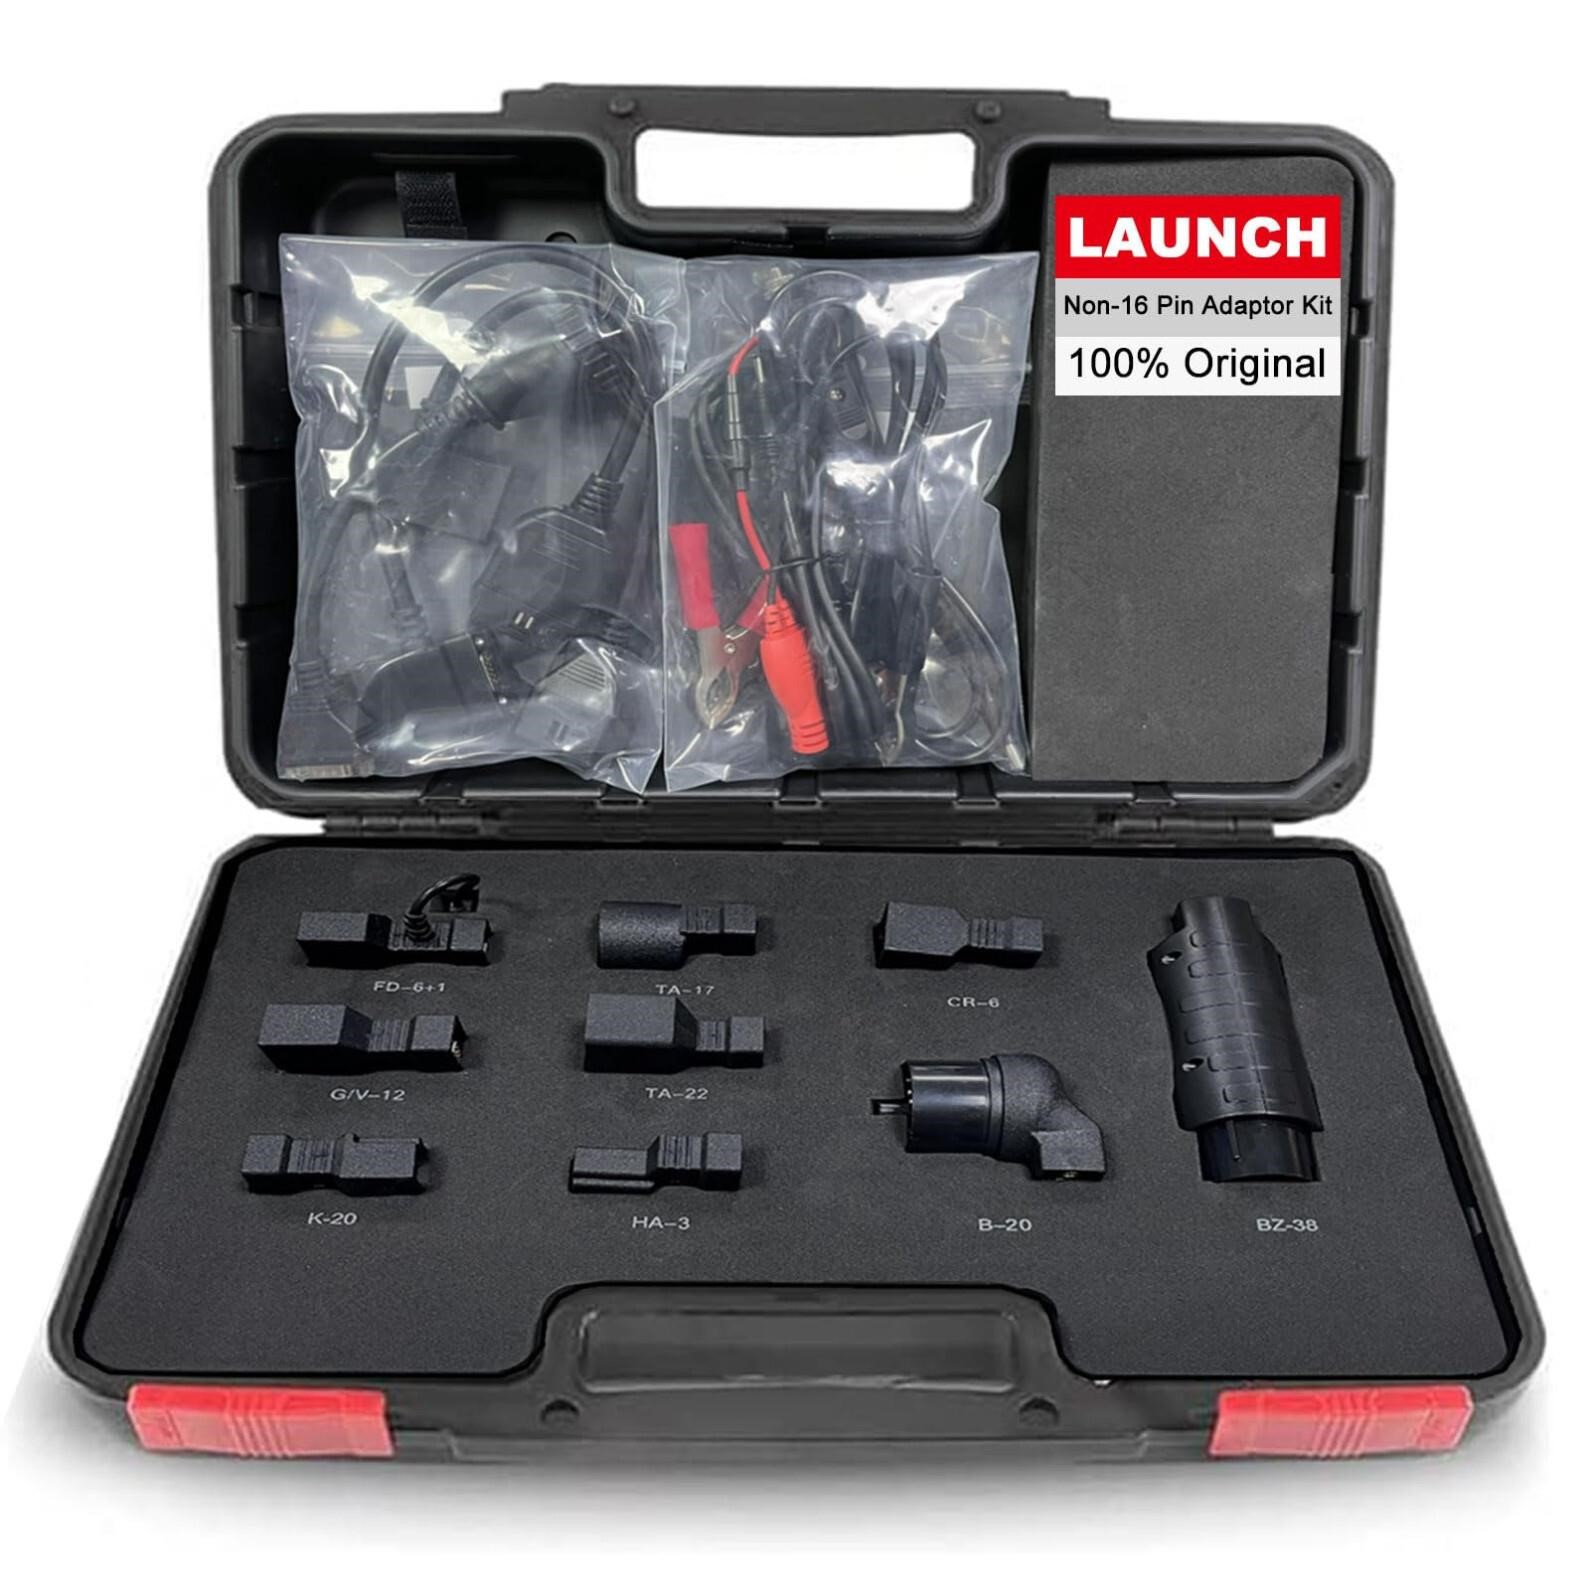 LAUNCH Non-16 Pin Adapter Kit OE-Compliant Connect